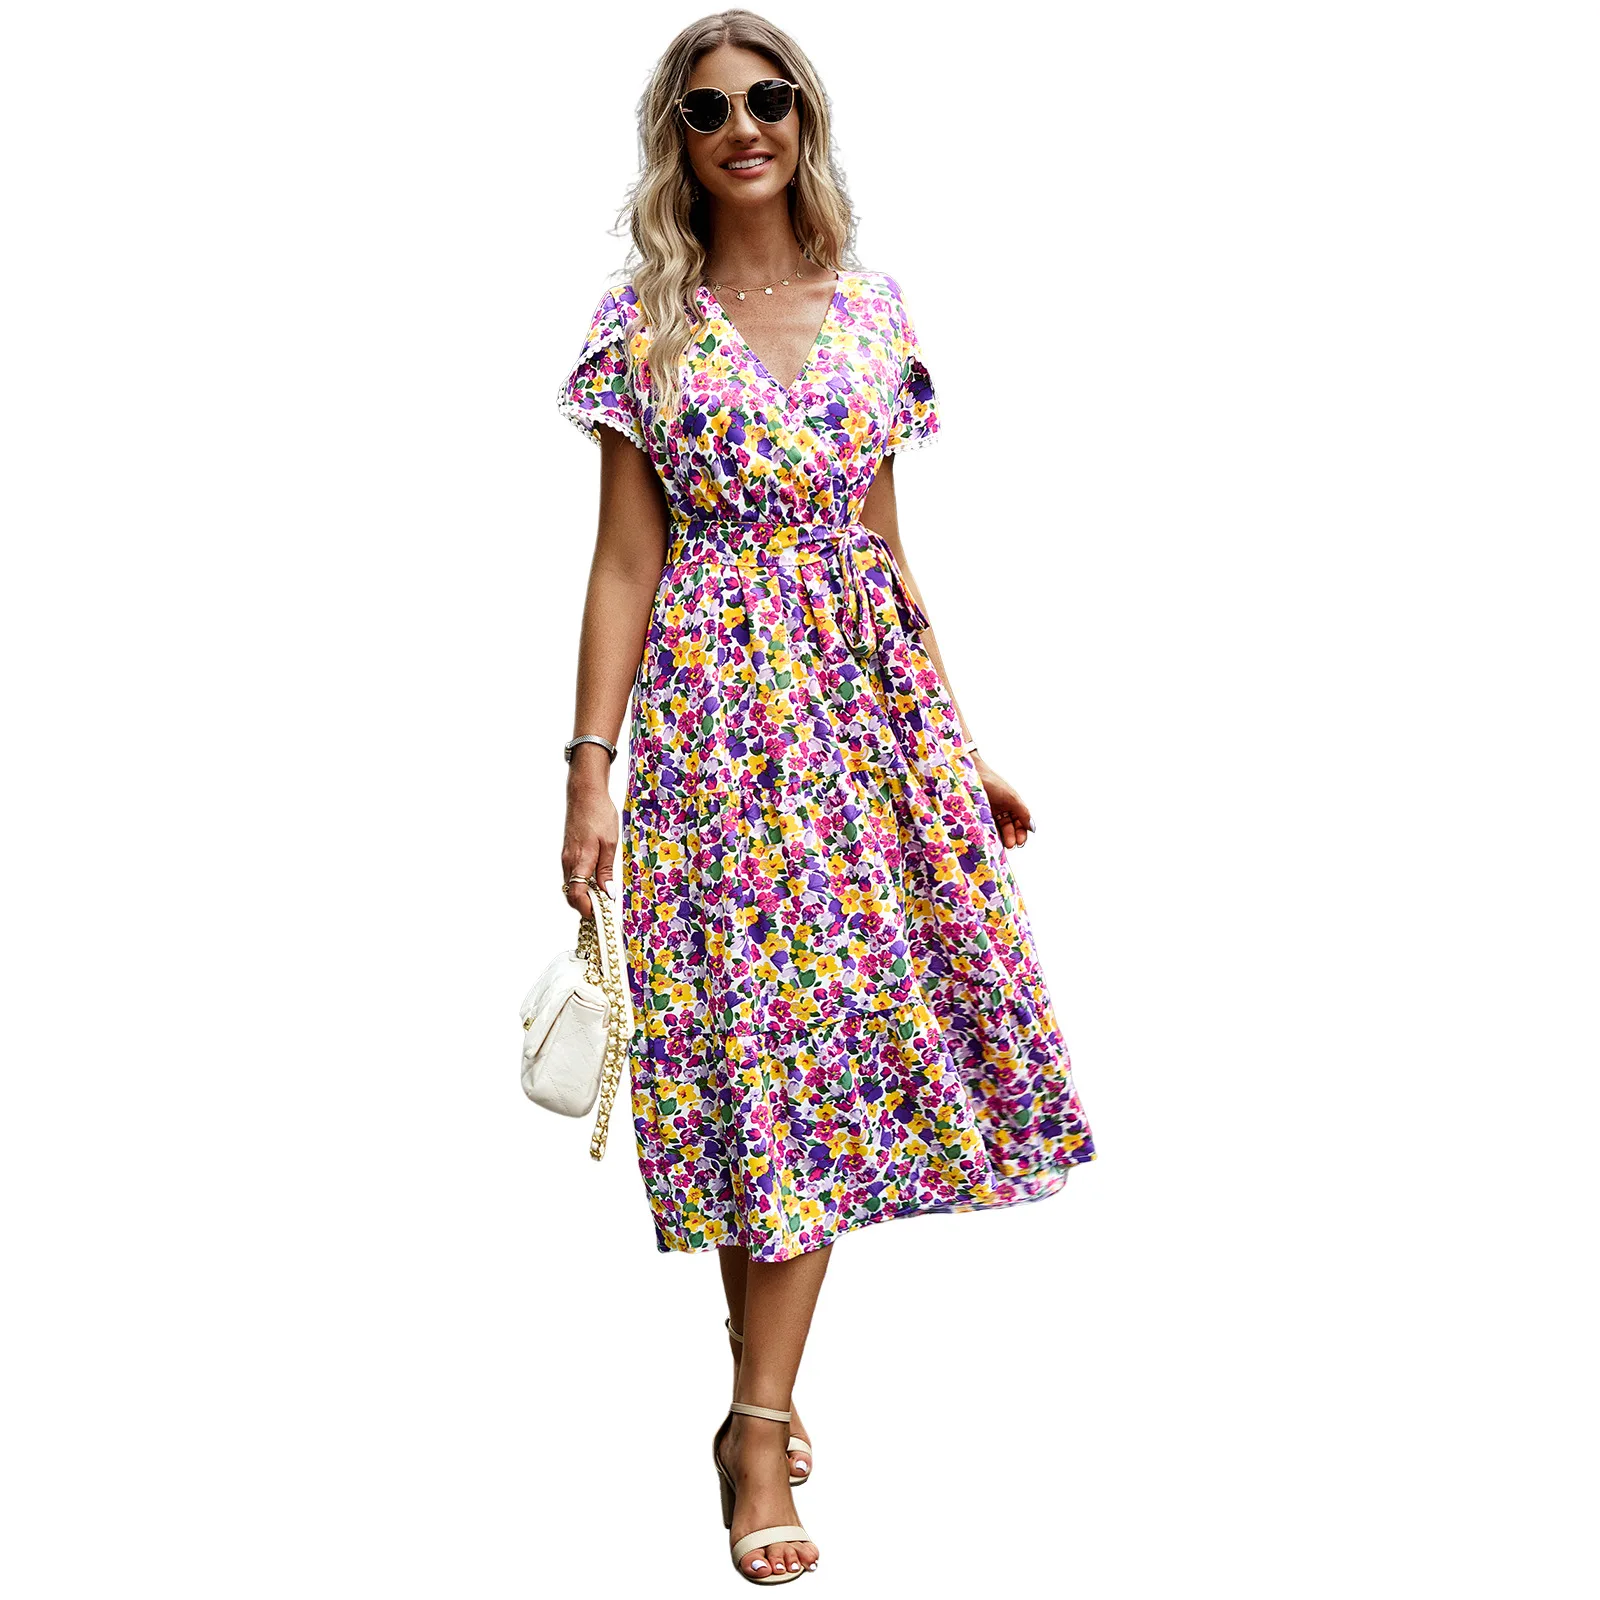 Ying Tang Custom Floral Print Lace-Up Casual Holiday Elegant Lady Dress Women Dress With V-Neck Short Sleeve OEM/ODM